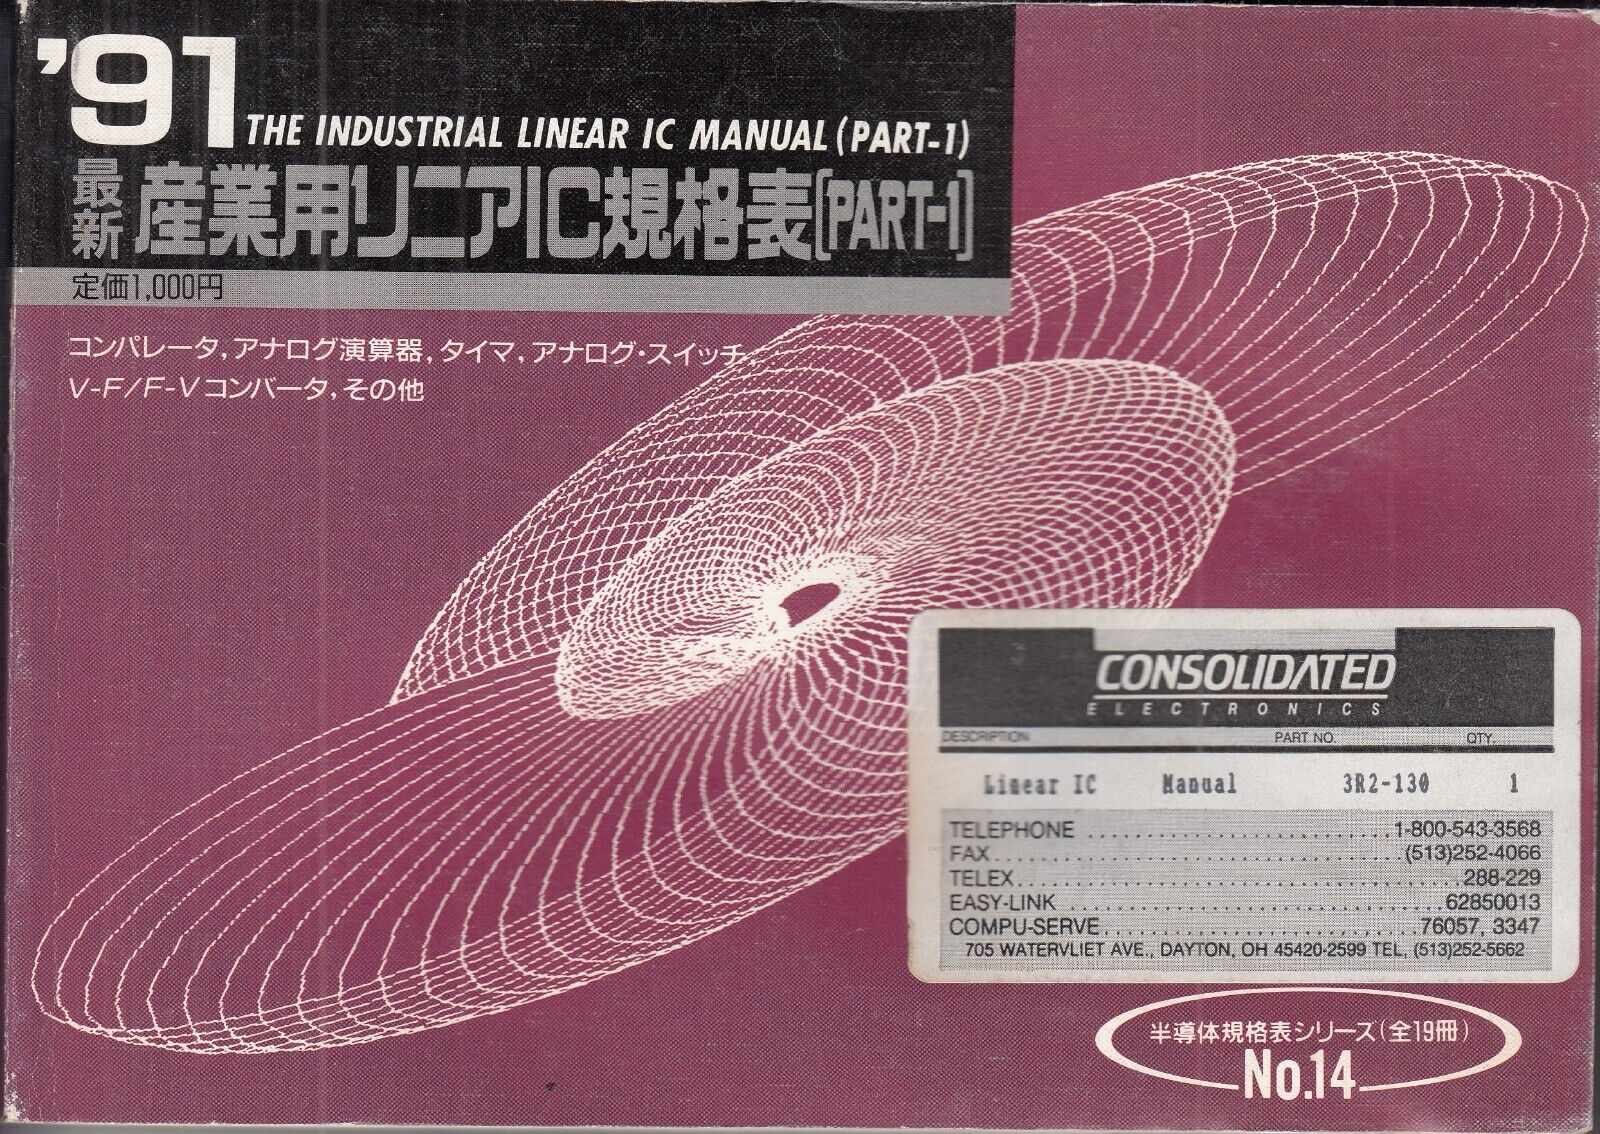 91 THE INDUSTRIAL LINEAR IC MANUAL PART 1 - NO. 14   - NON ENGLISH PAPERBACK